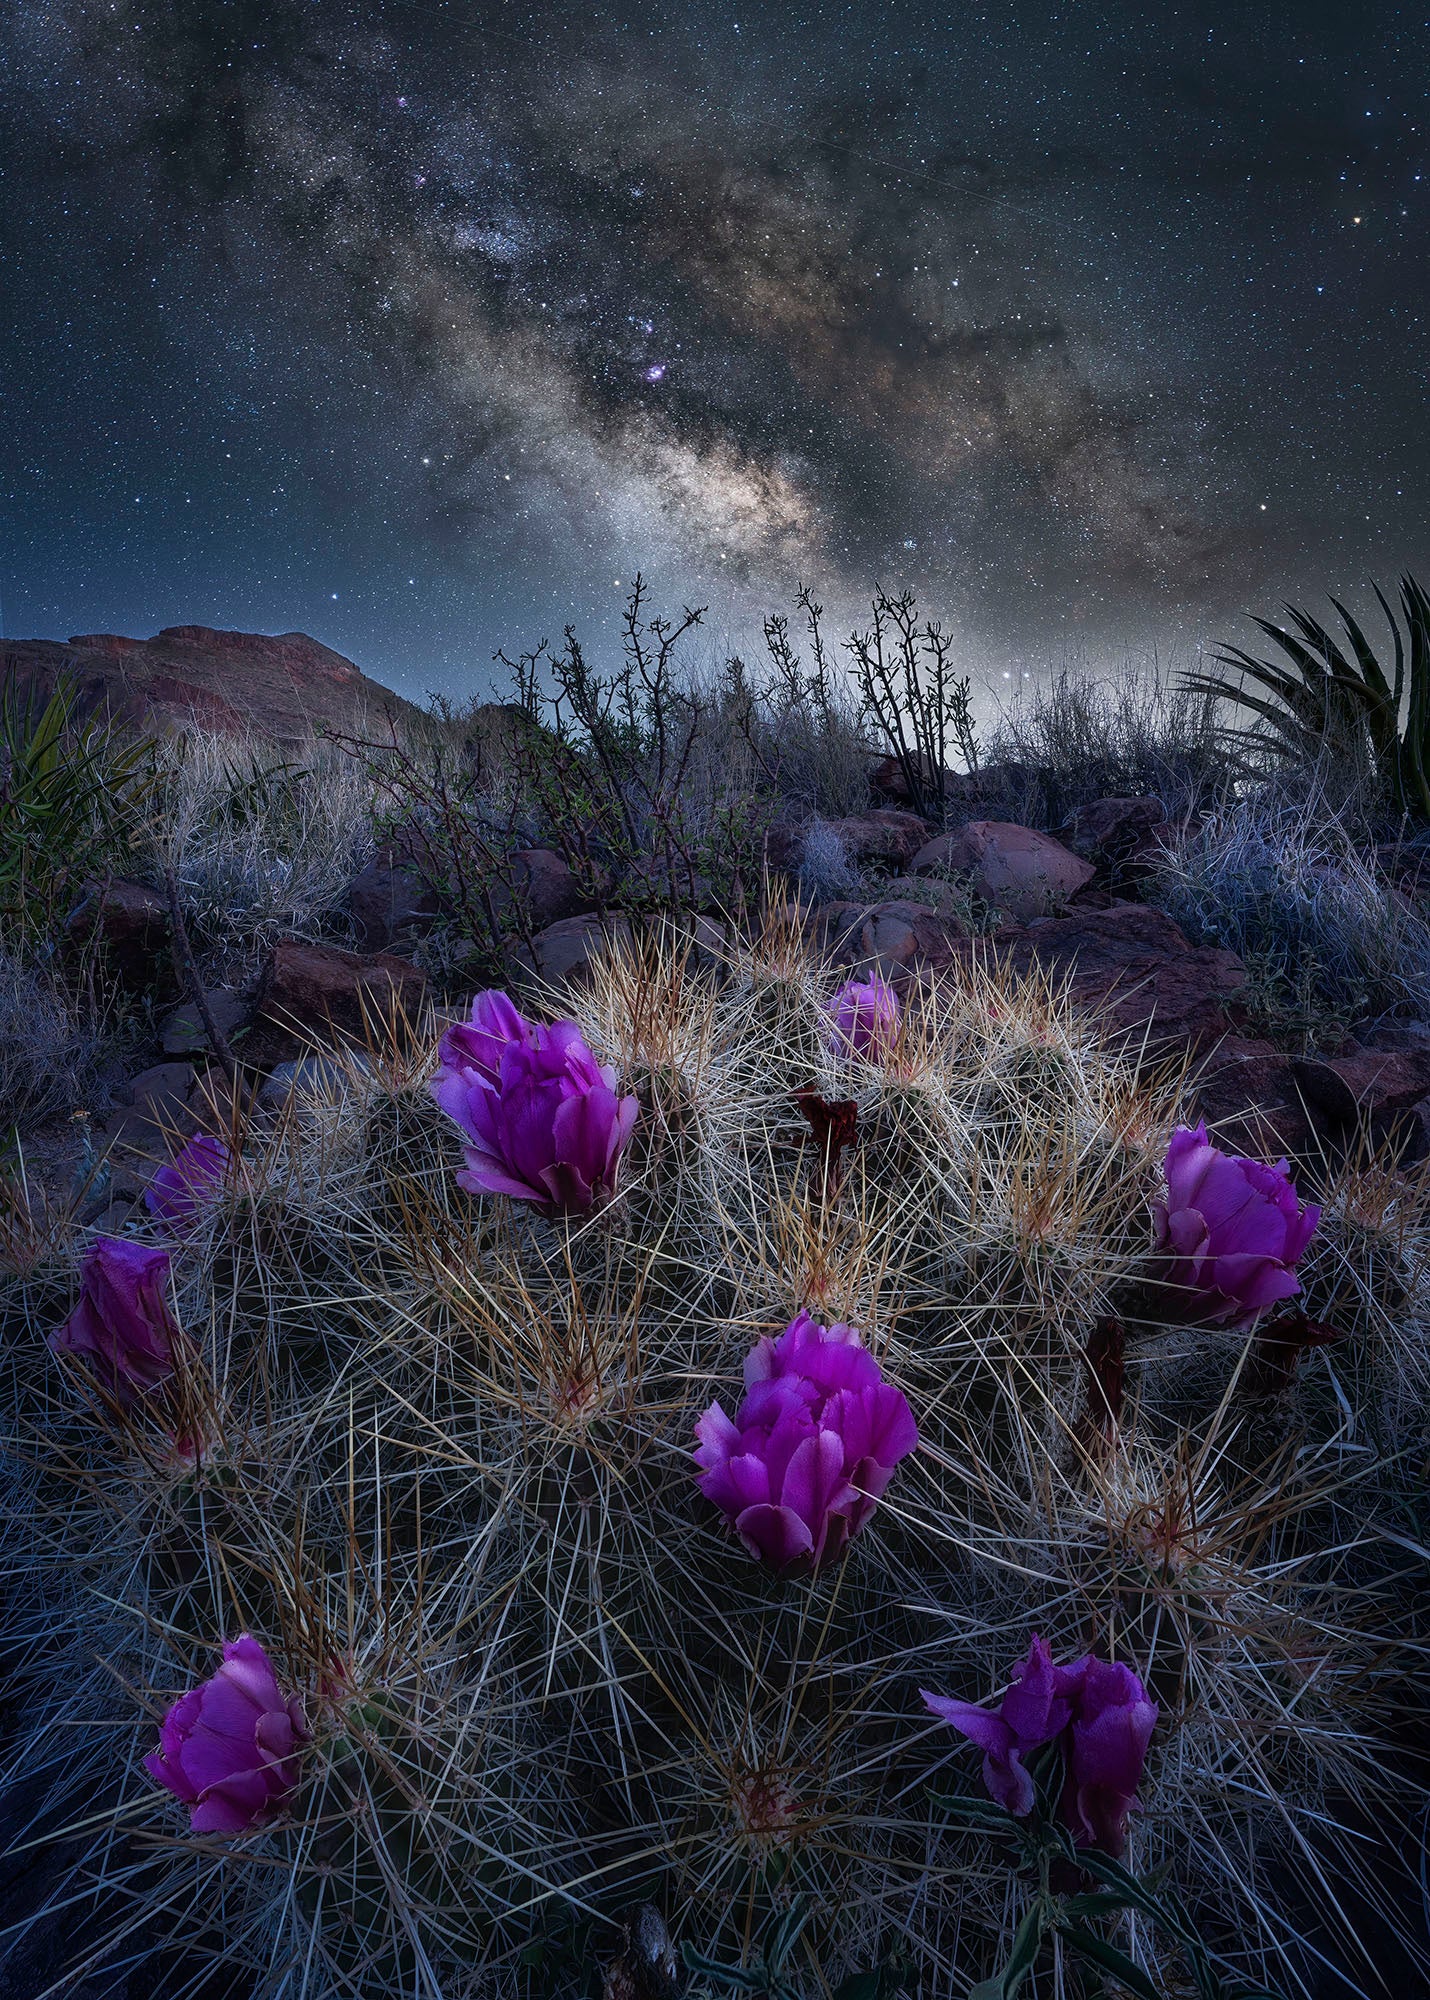 Photo by Steve Hamm. Composite: Foreground: Sony Alpha 7R III. Sony 12-24mm f/2.8 G Master. 2.5-sec, f/8, ISO 100. Sky: Tracked Sony Alpha 7R III. Sony 12-24mm f/2.8 G Master. 10-min., f/2.8, ISO 640